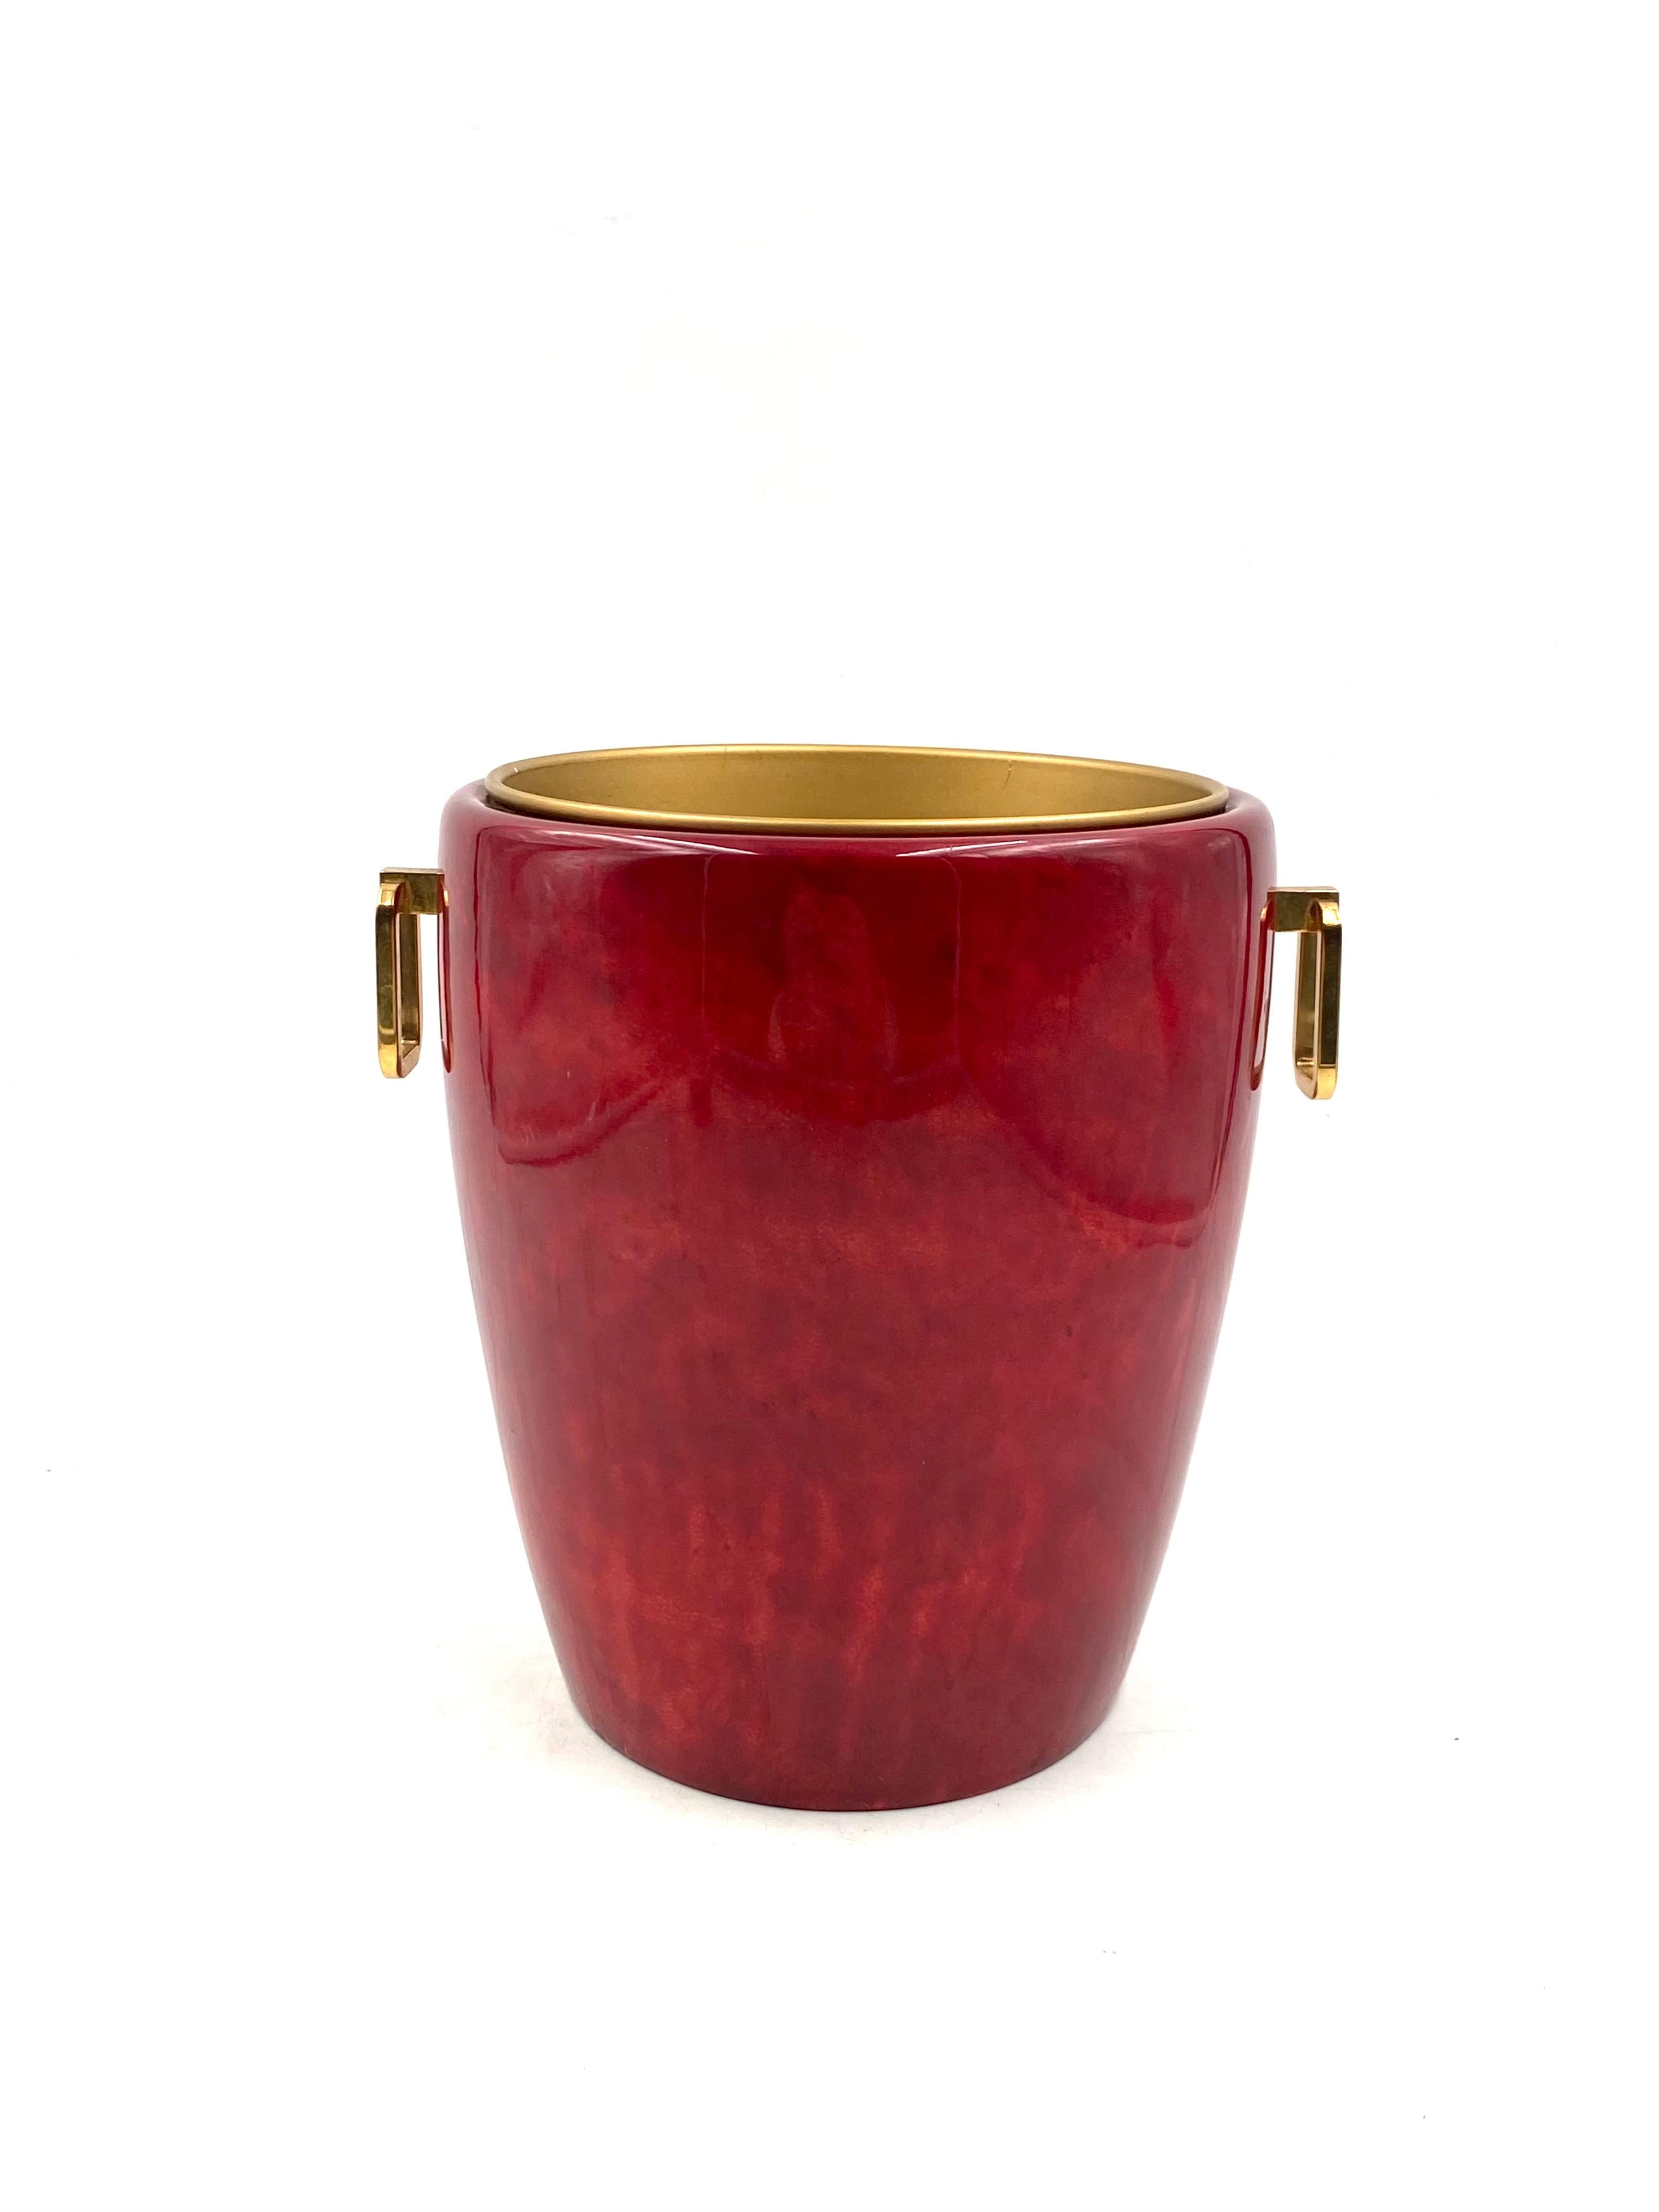 Metal Aldo Tura, Brass and red Parchment cooler / Ice bucket, Italy, 1960s